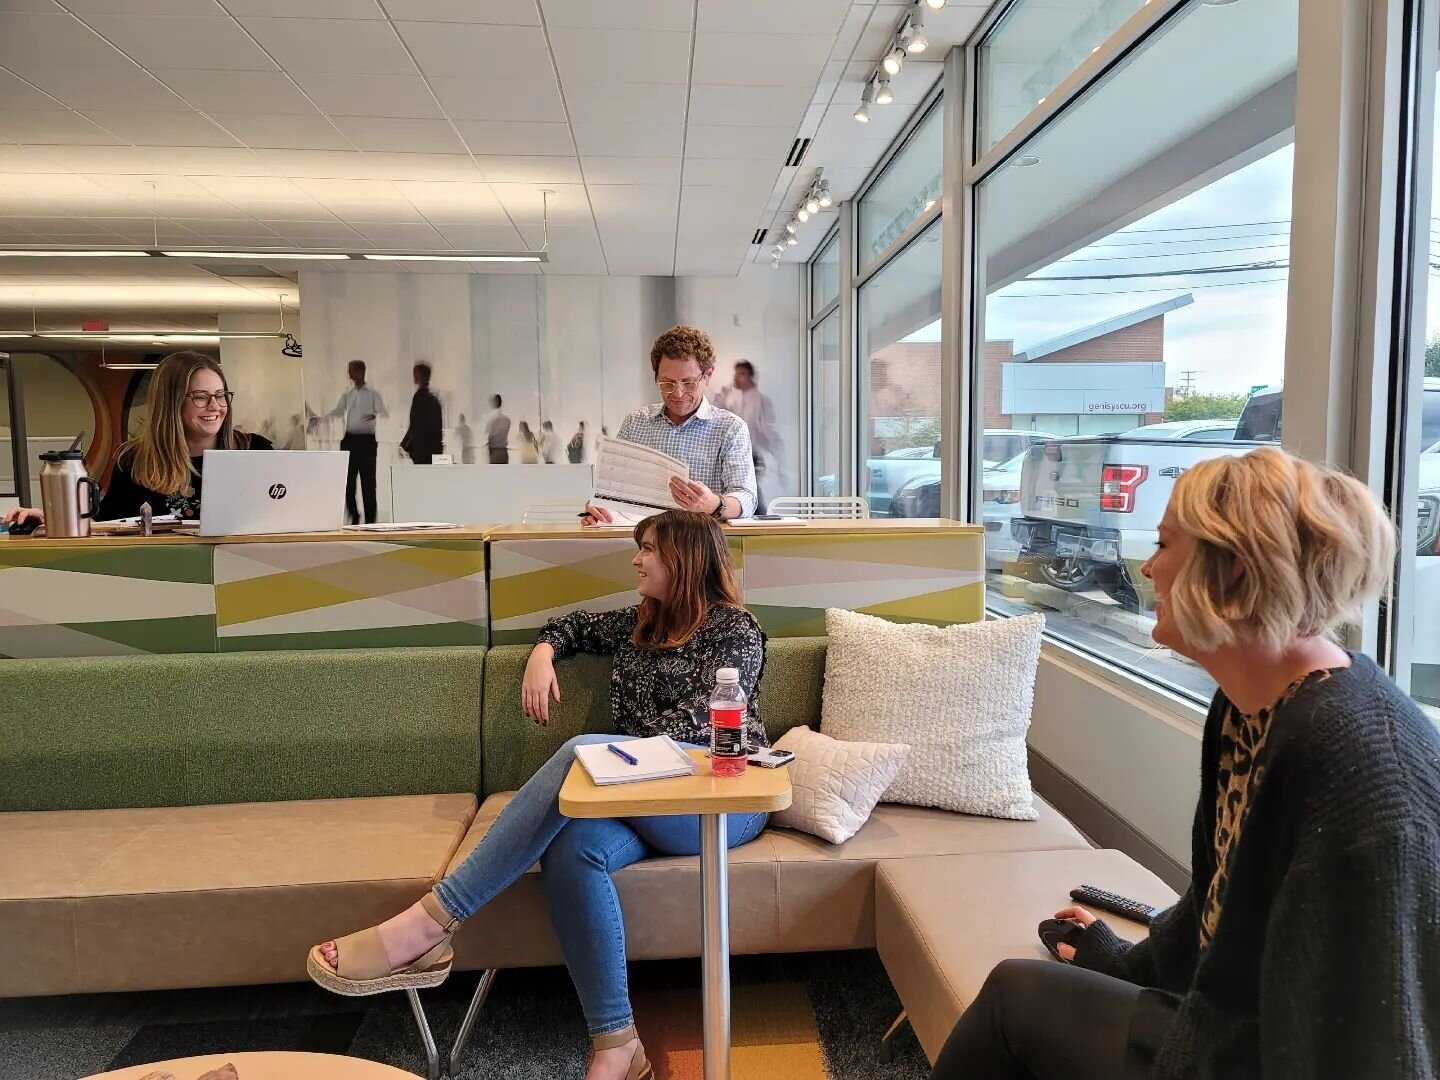 While collaborating face to face, we love the opportunity to break out of the conference room and utilize a variety of spaces that supports creative thinking. 

Where do you prefer to collaborate? 
.
.
.
#inspirationstartshere #iscginc #workplacedesi